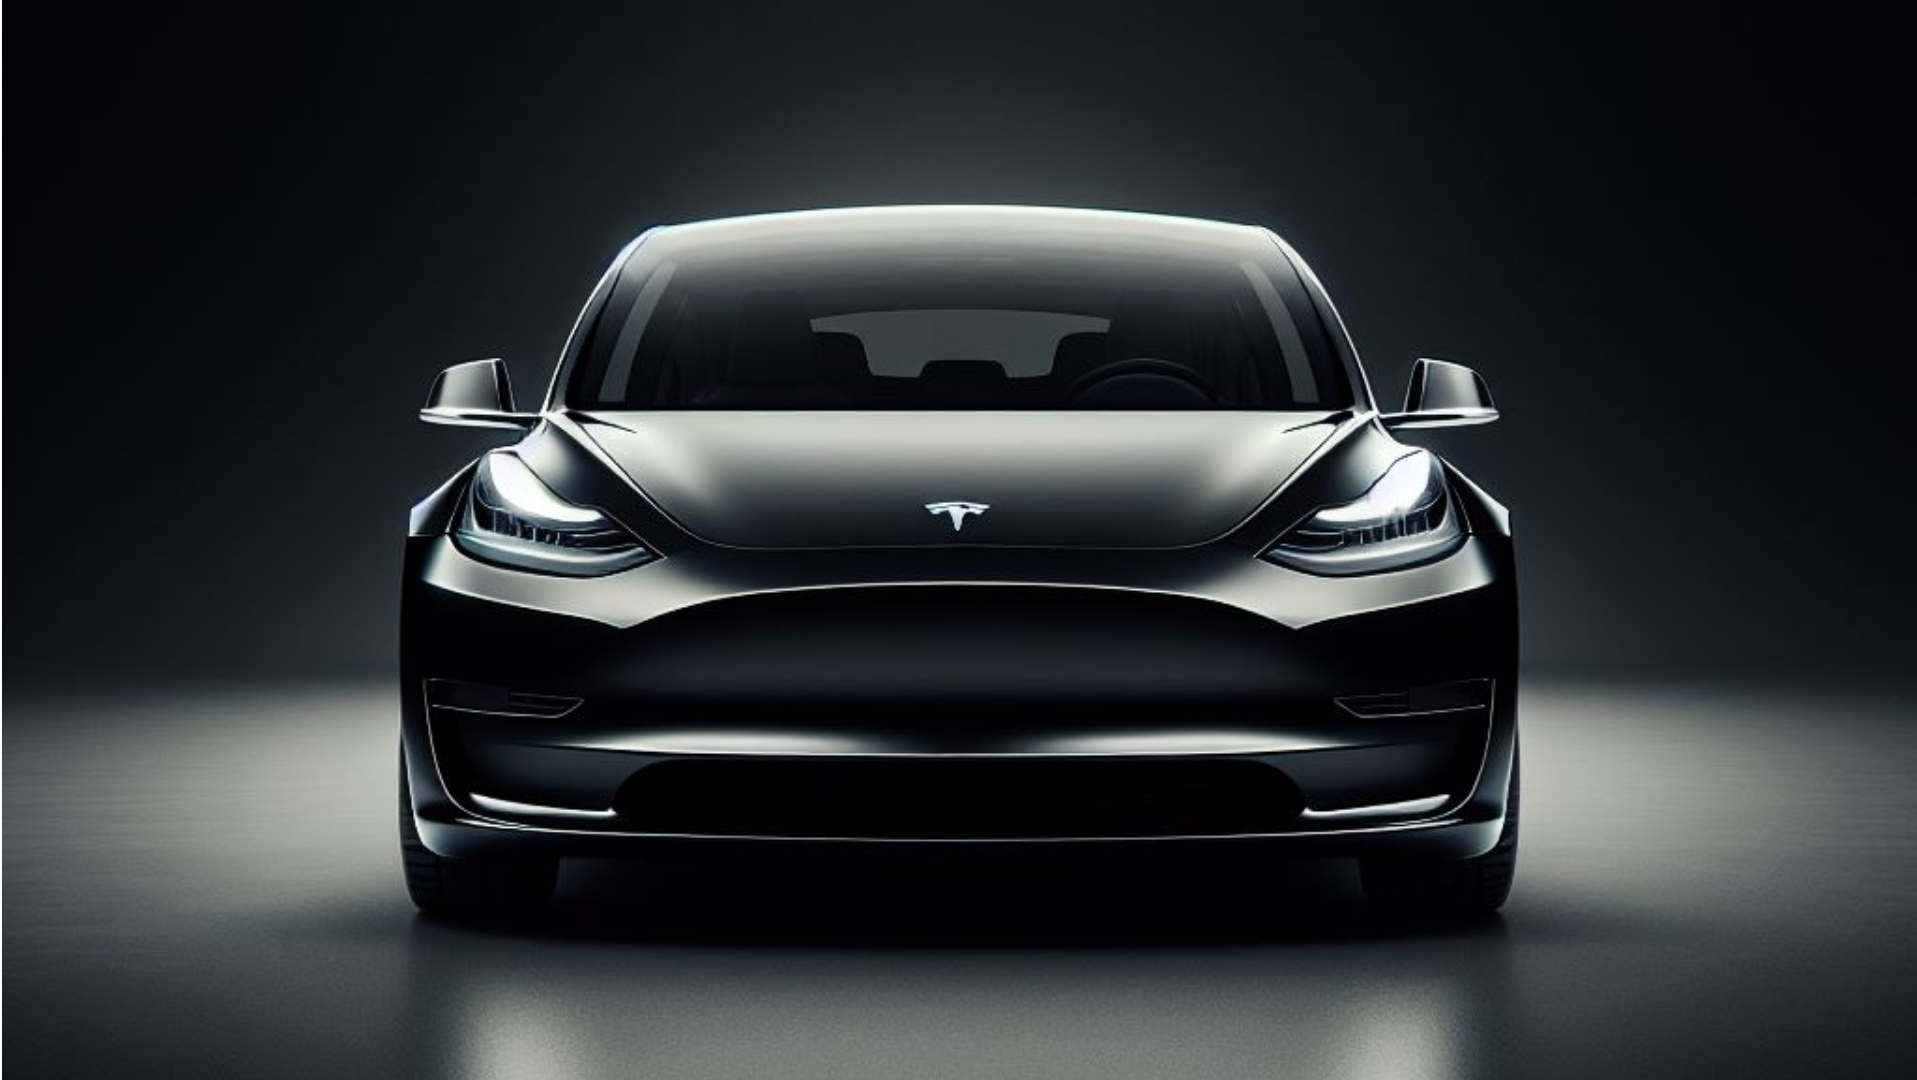 Discover the latest Tesla Model 3 advancements, including upgrades in performance, design, and autonomous driving features for sustainable transportation.